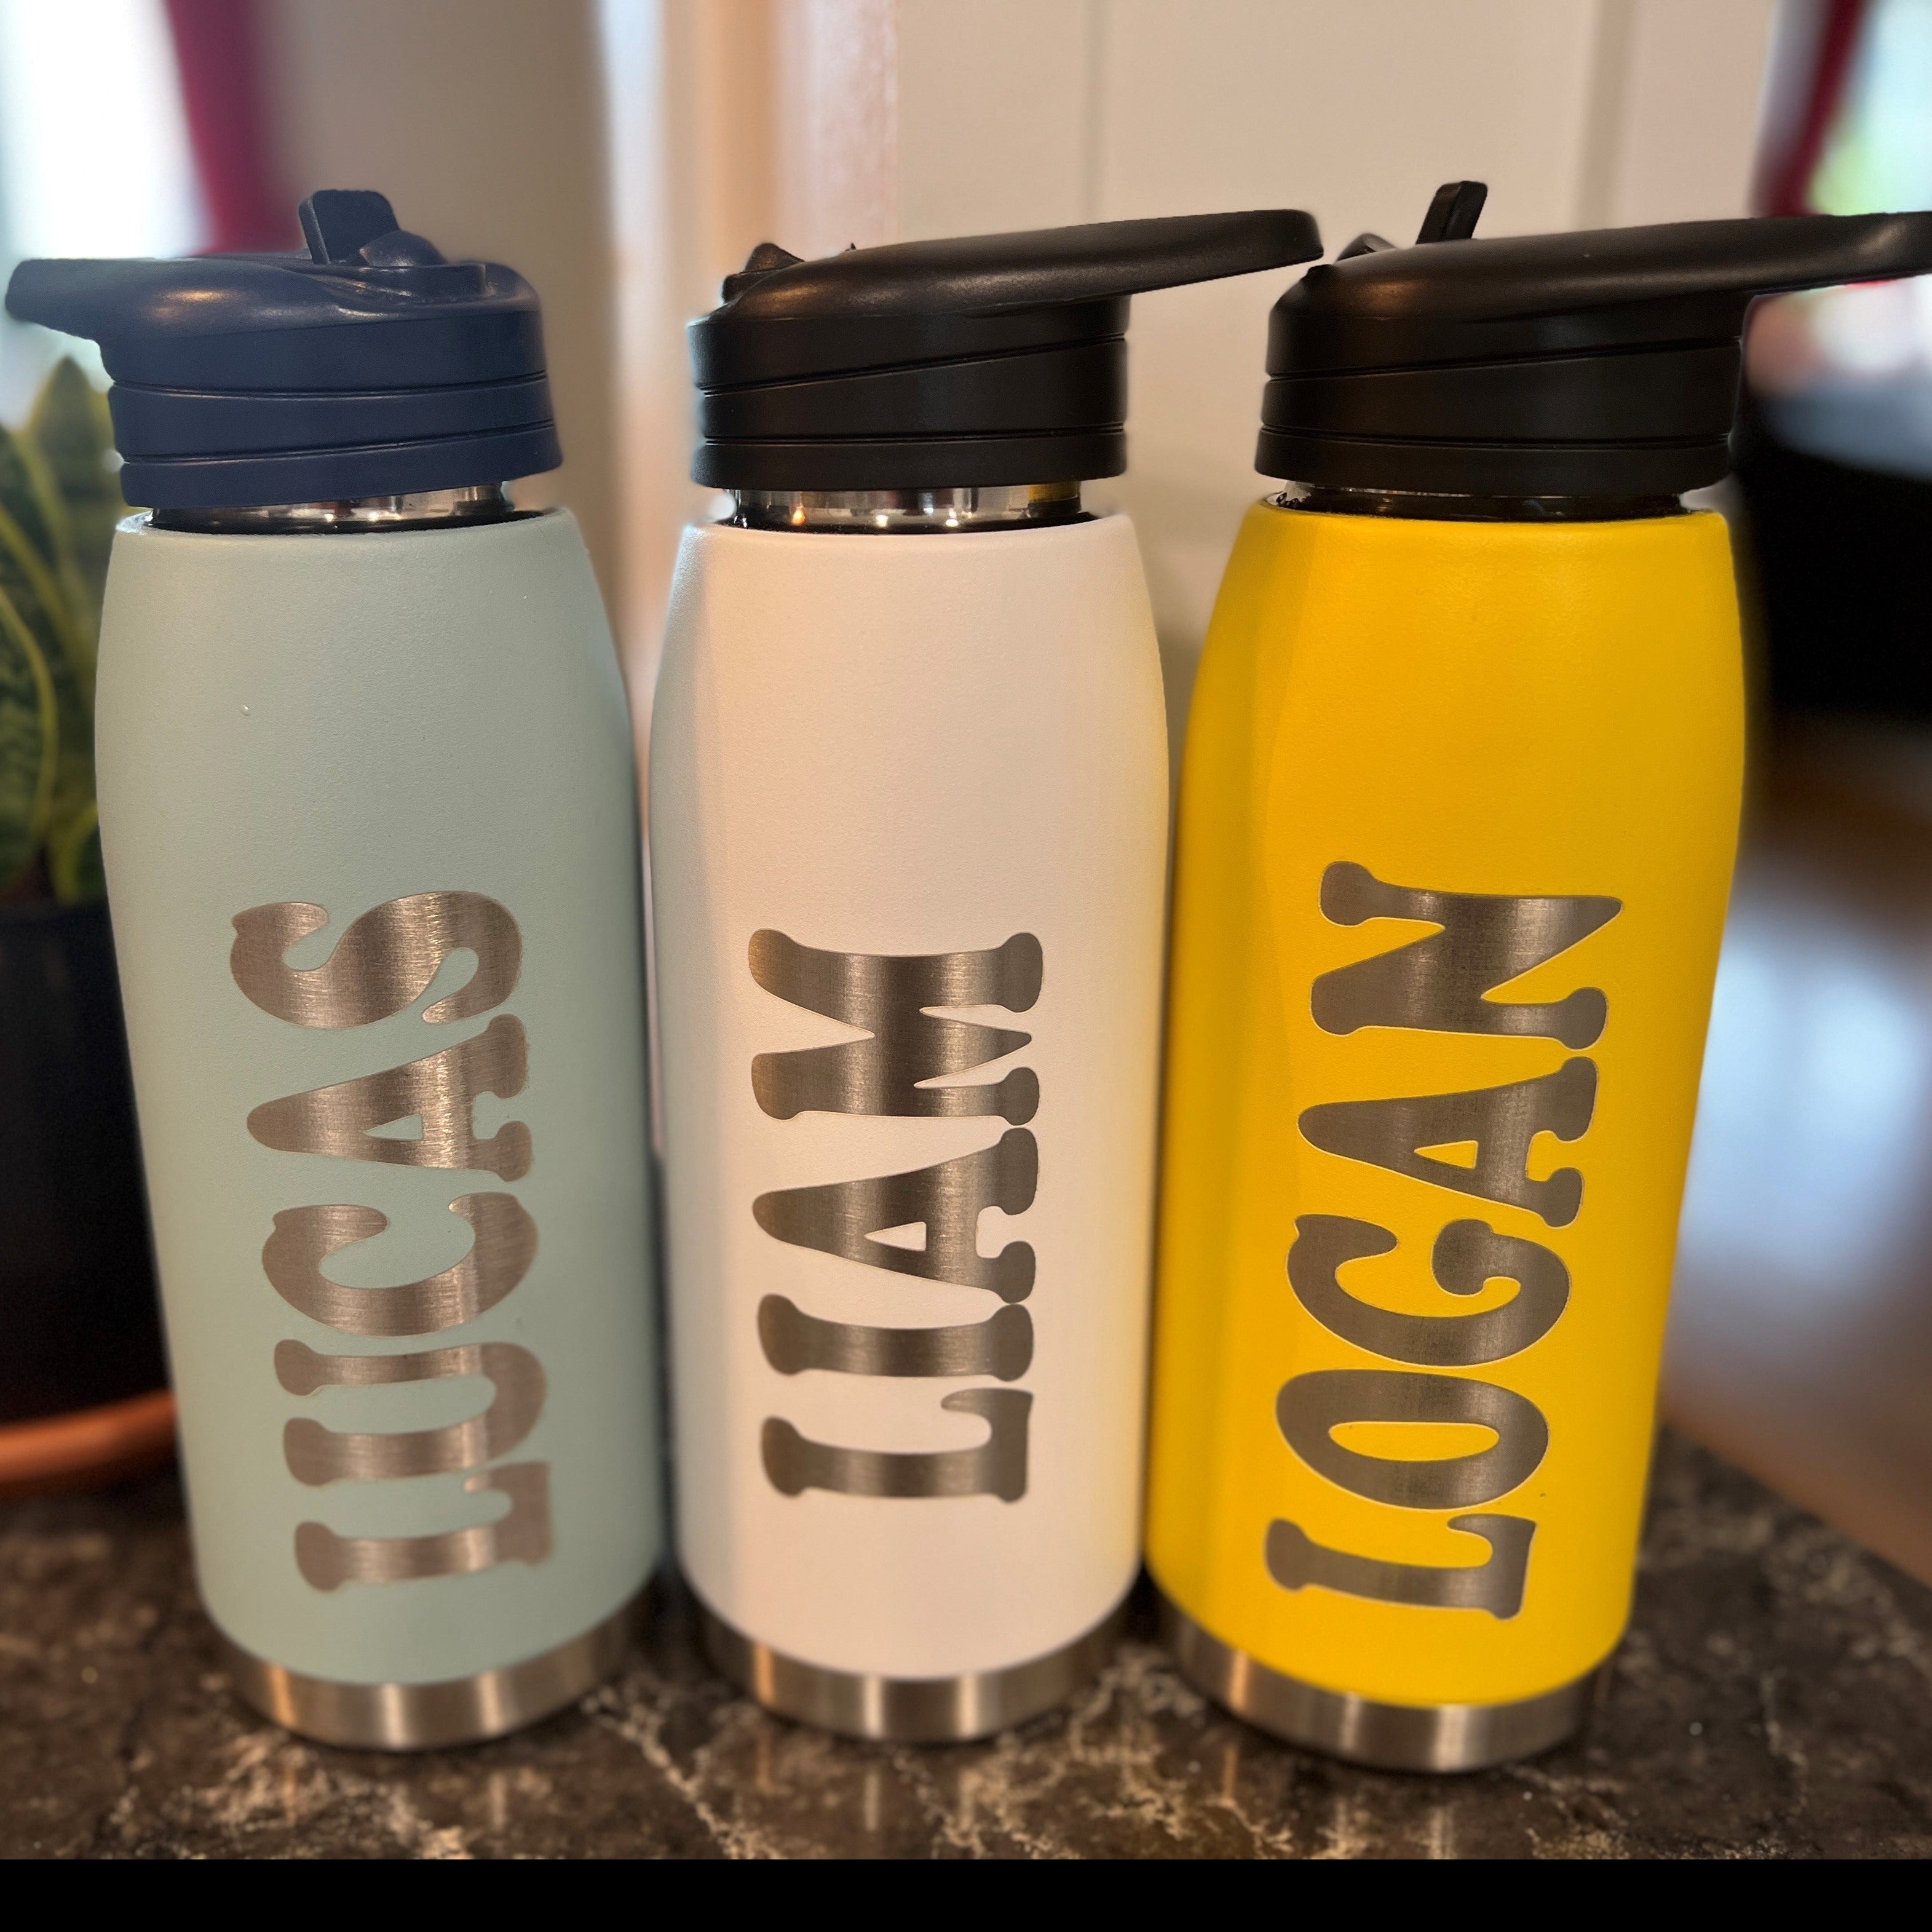 Custom Water Bottle - 12 oz Yellow Insulated Water Bottle with Straw